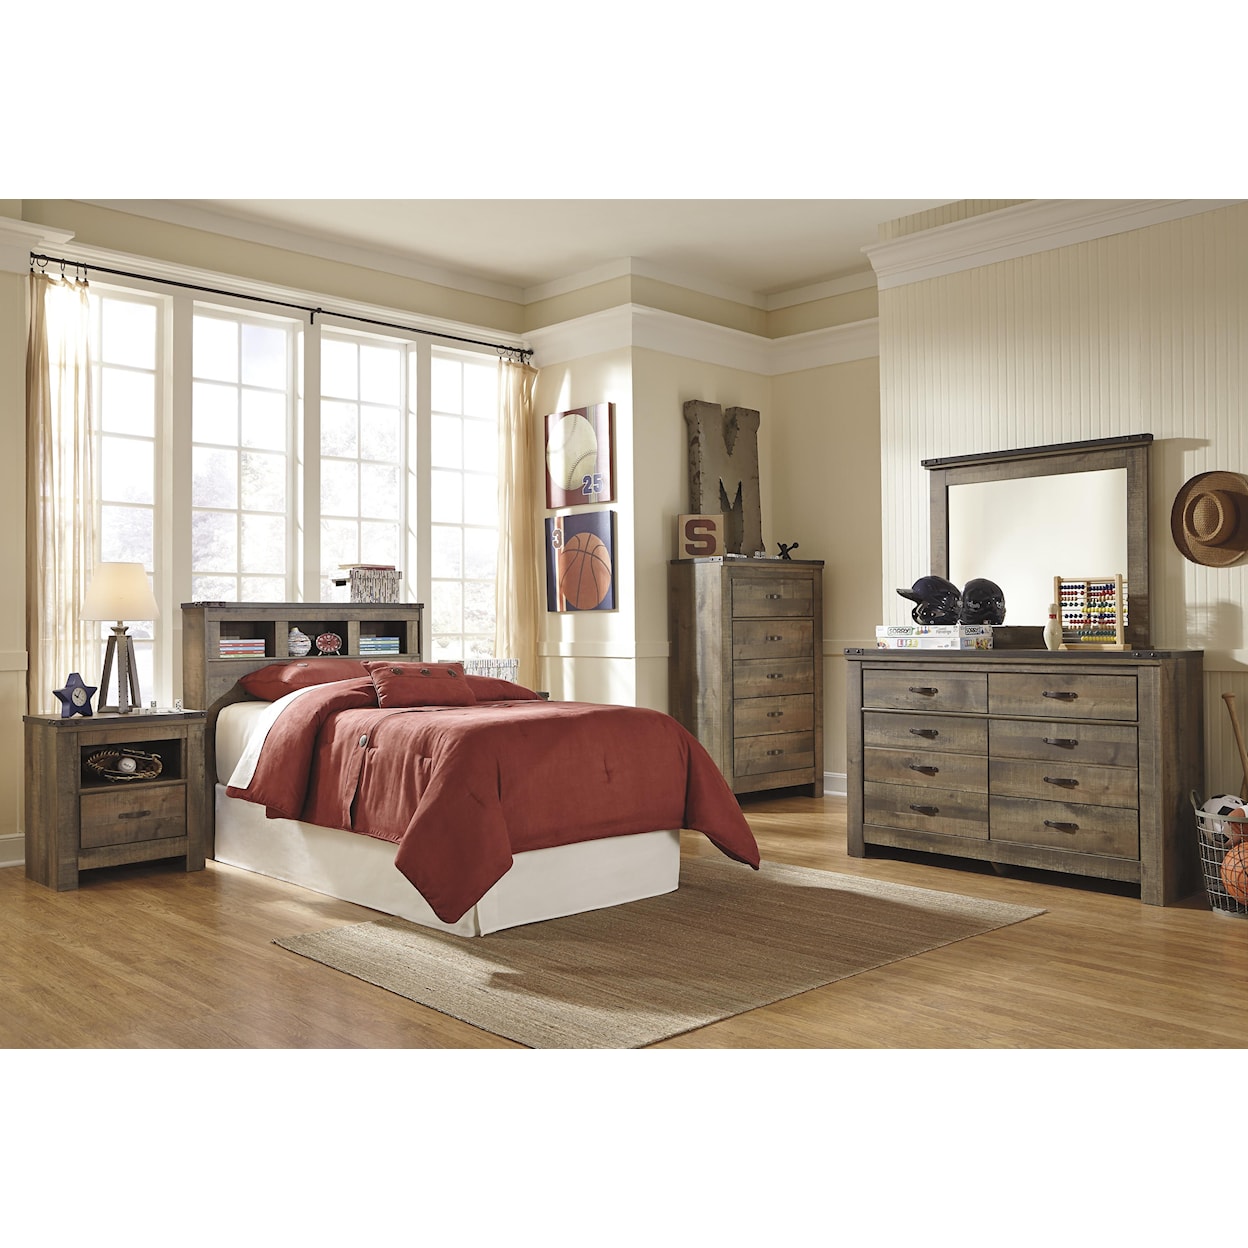 Signature Design by Ashley Trinell 5pc Twin Bedroom Group